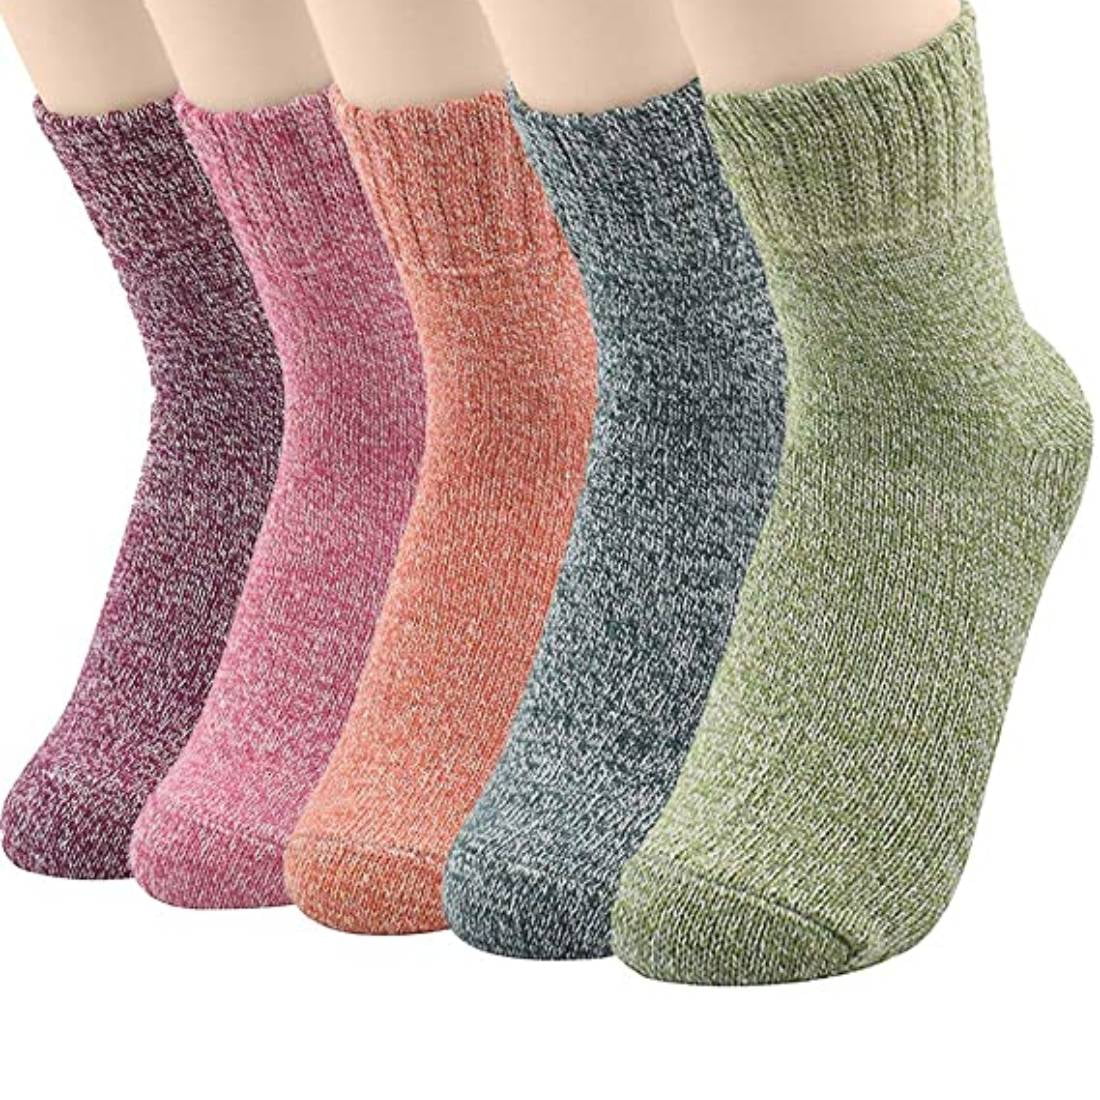 5 Pairs Womens Wool Cashmere Thick Sock Lady Soft Casual Winter Socks Xmas Gifts 